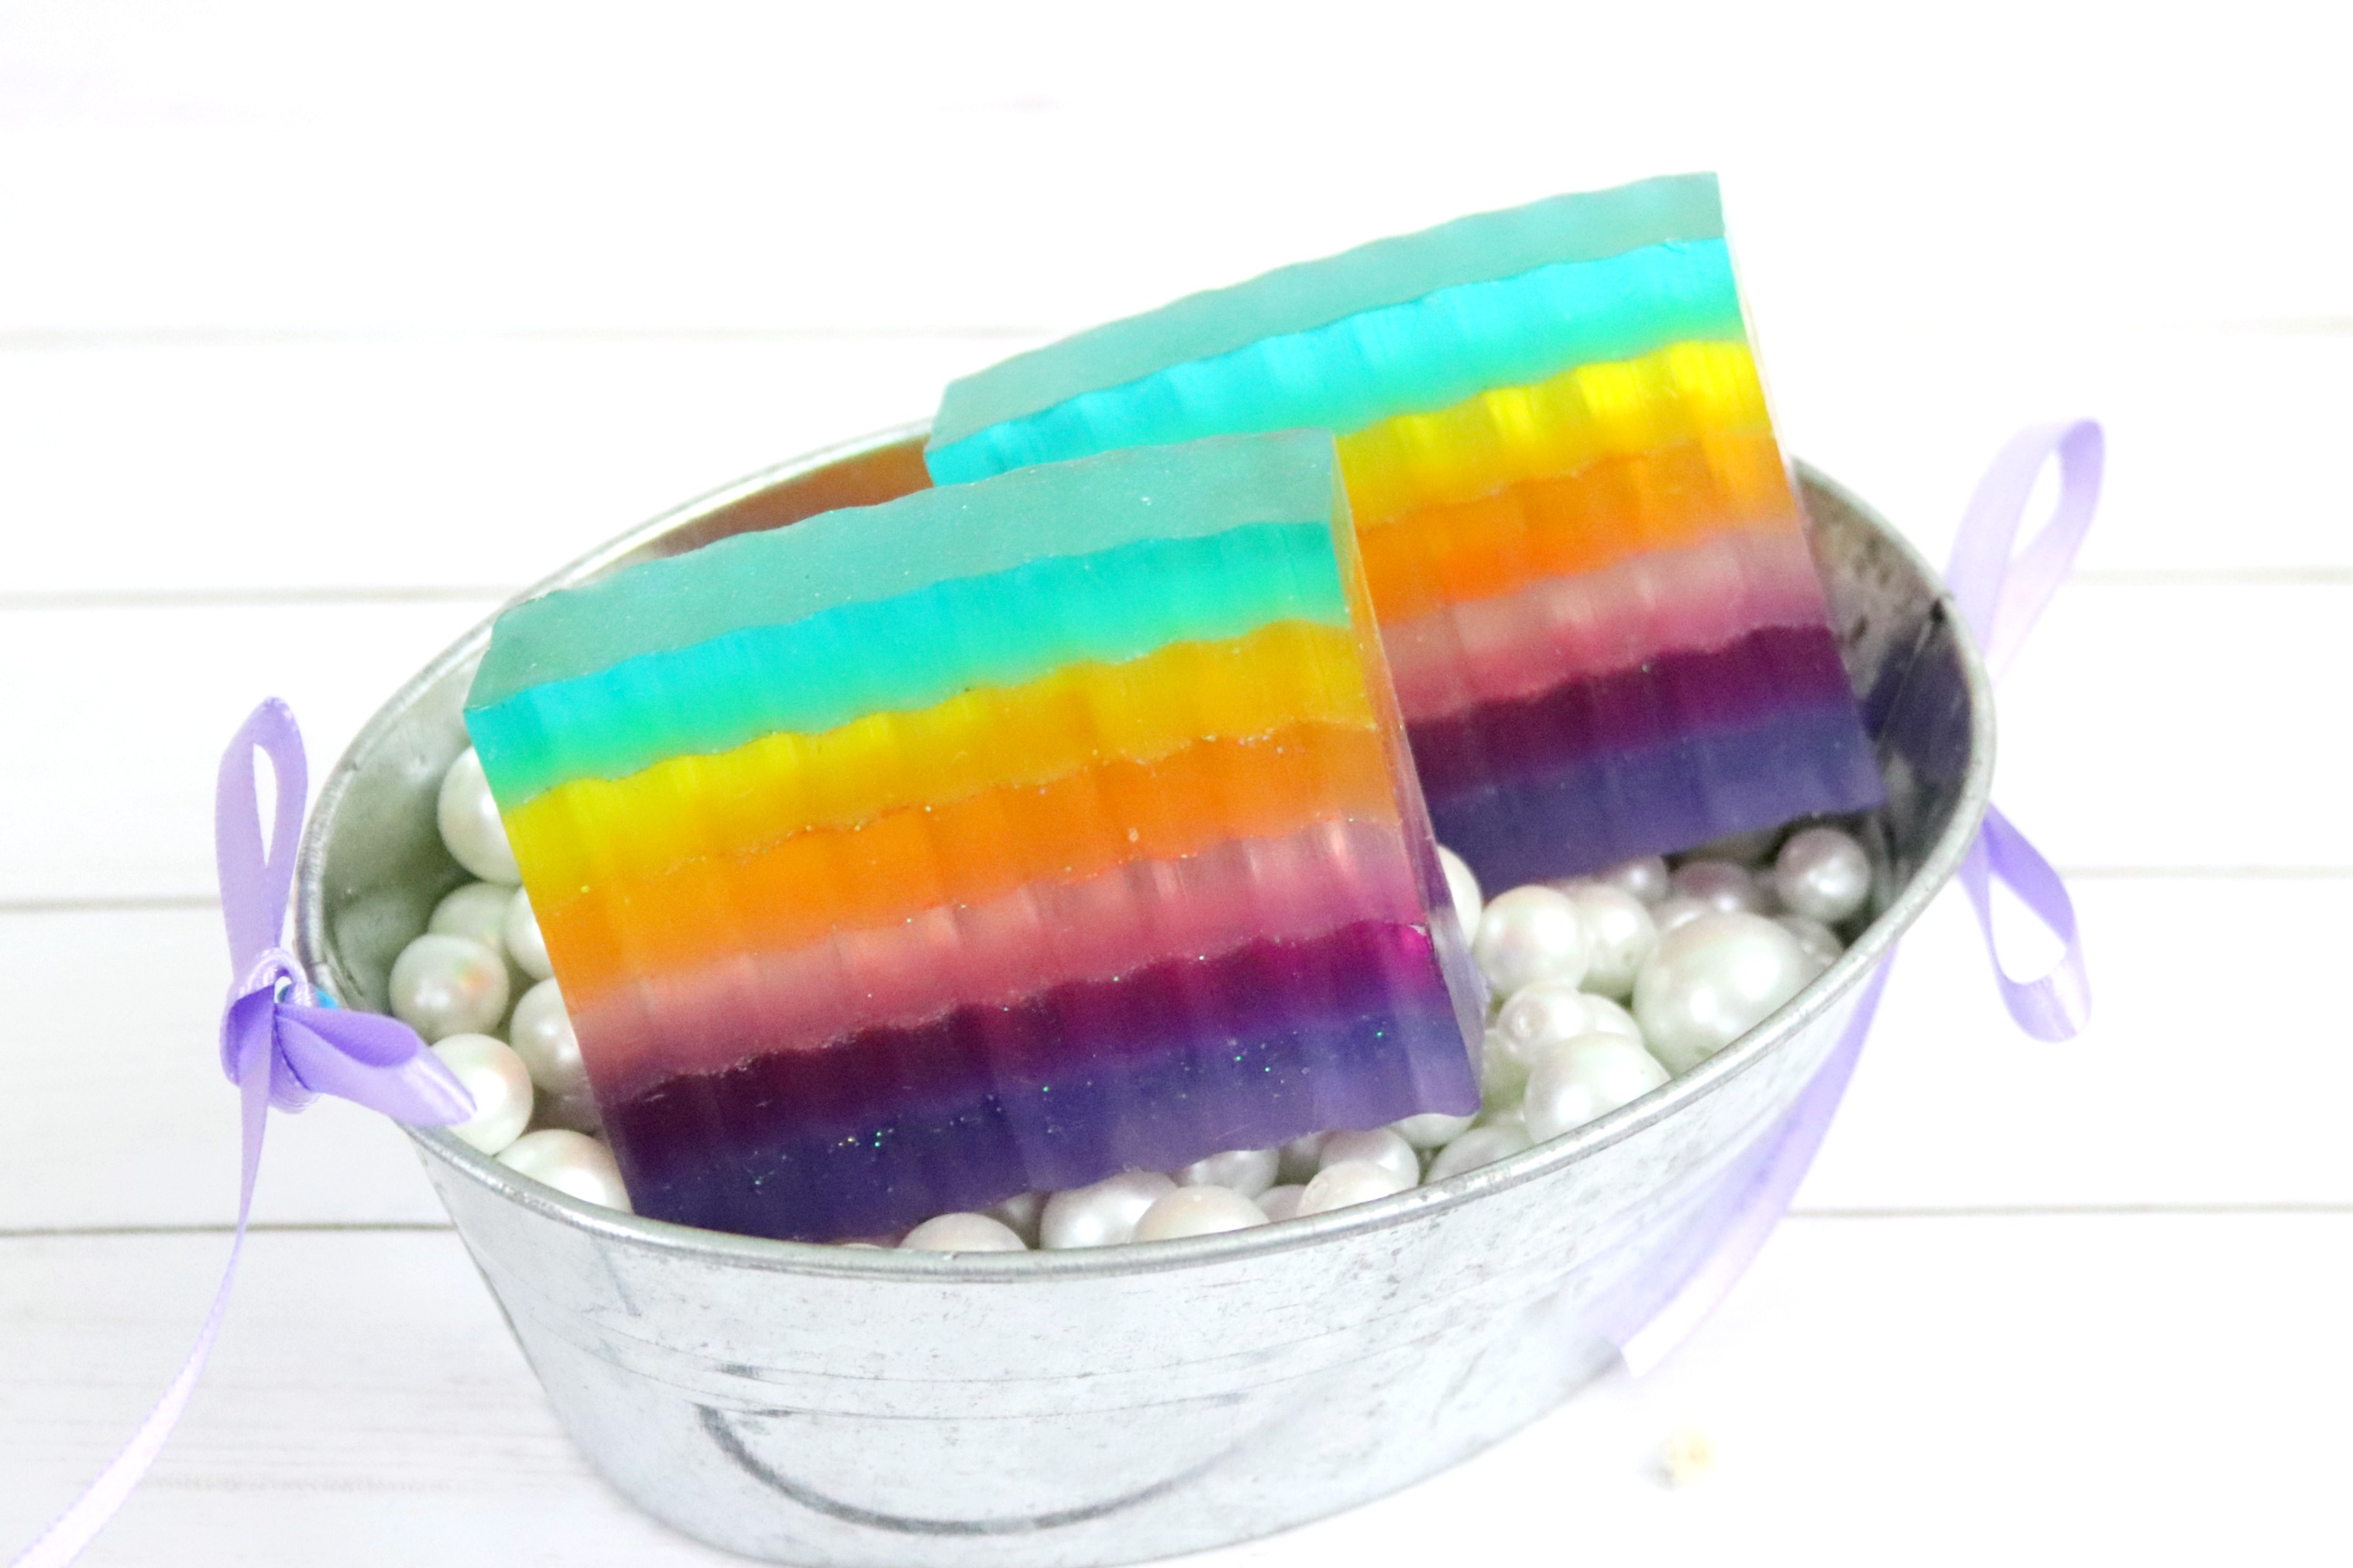 Melt and Pour DIY Rainbow Layered Soap Tutorial